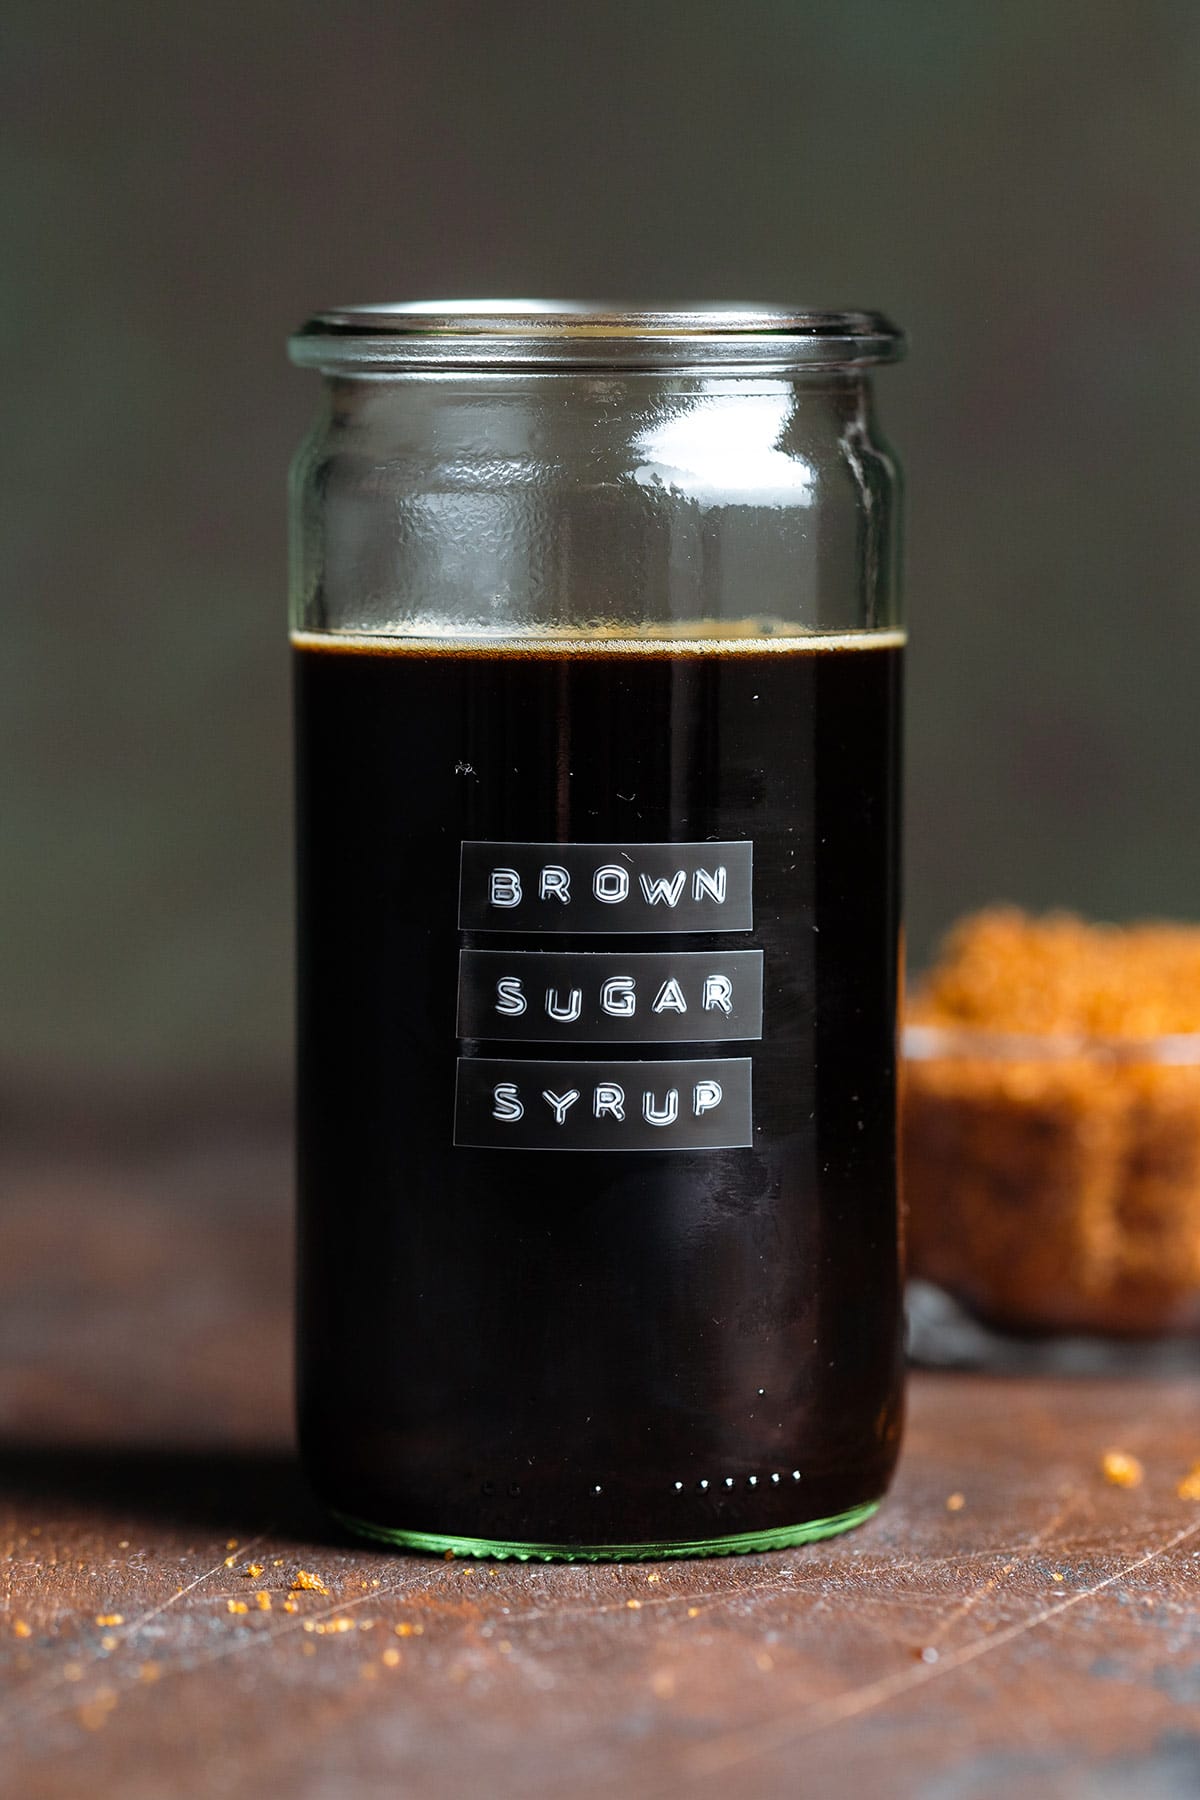 Dark syrup in a glass jar with an embossed label that say brown sugar simple syrup.